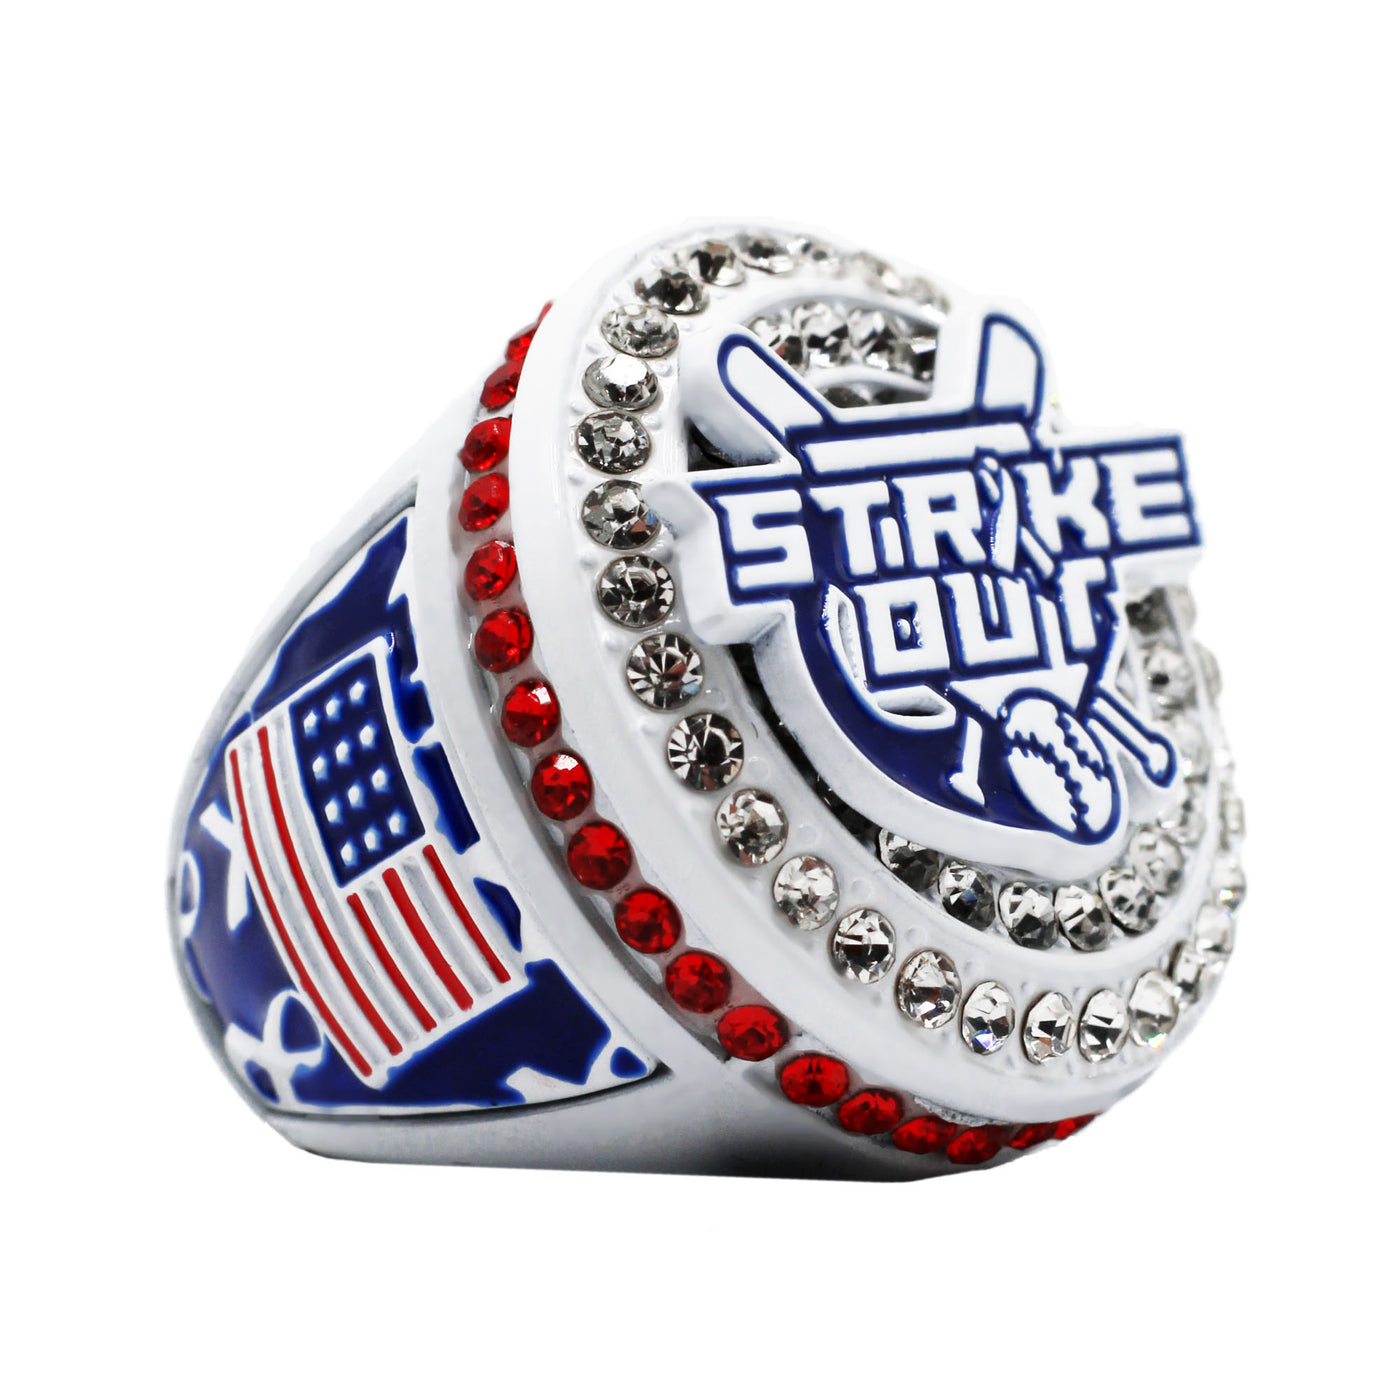 STRIKEOUT 4 CANCER WHITEOUT RING